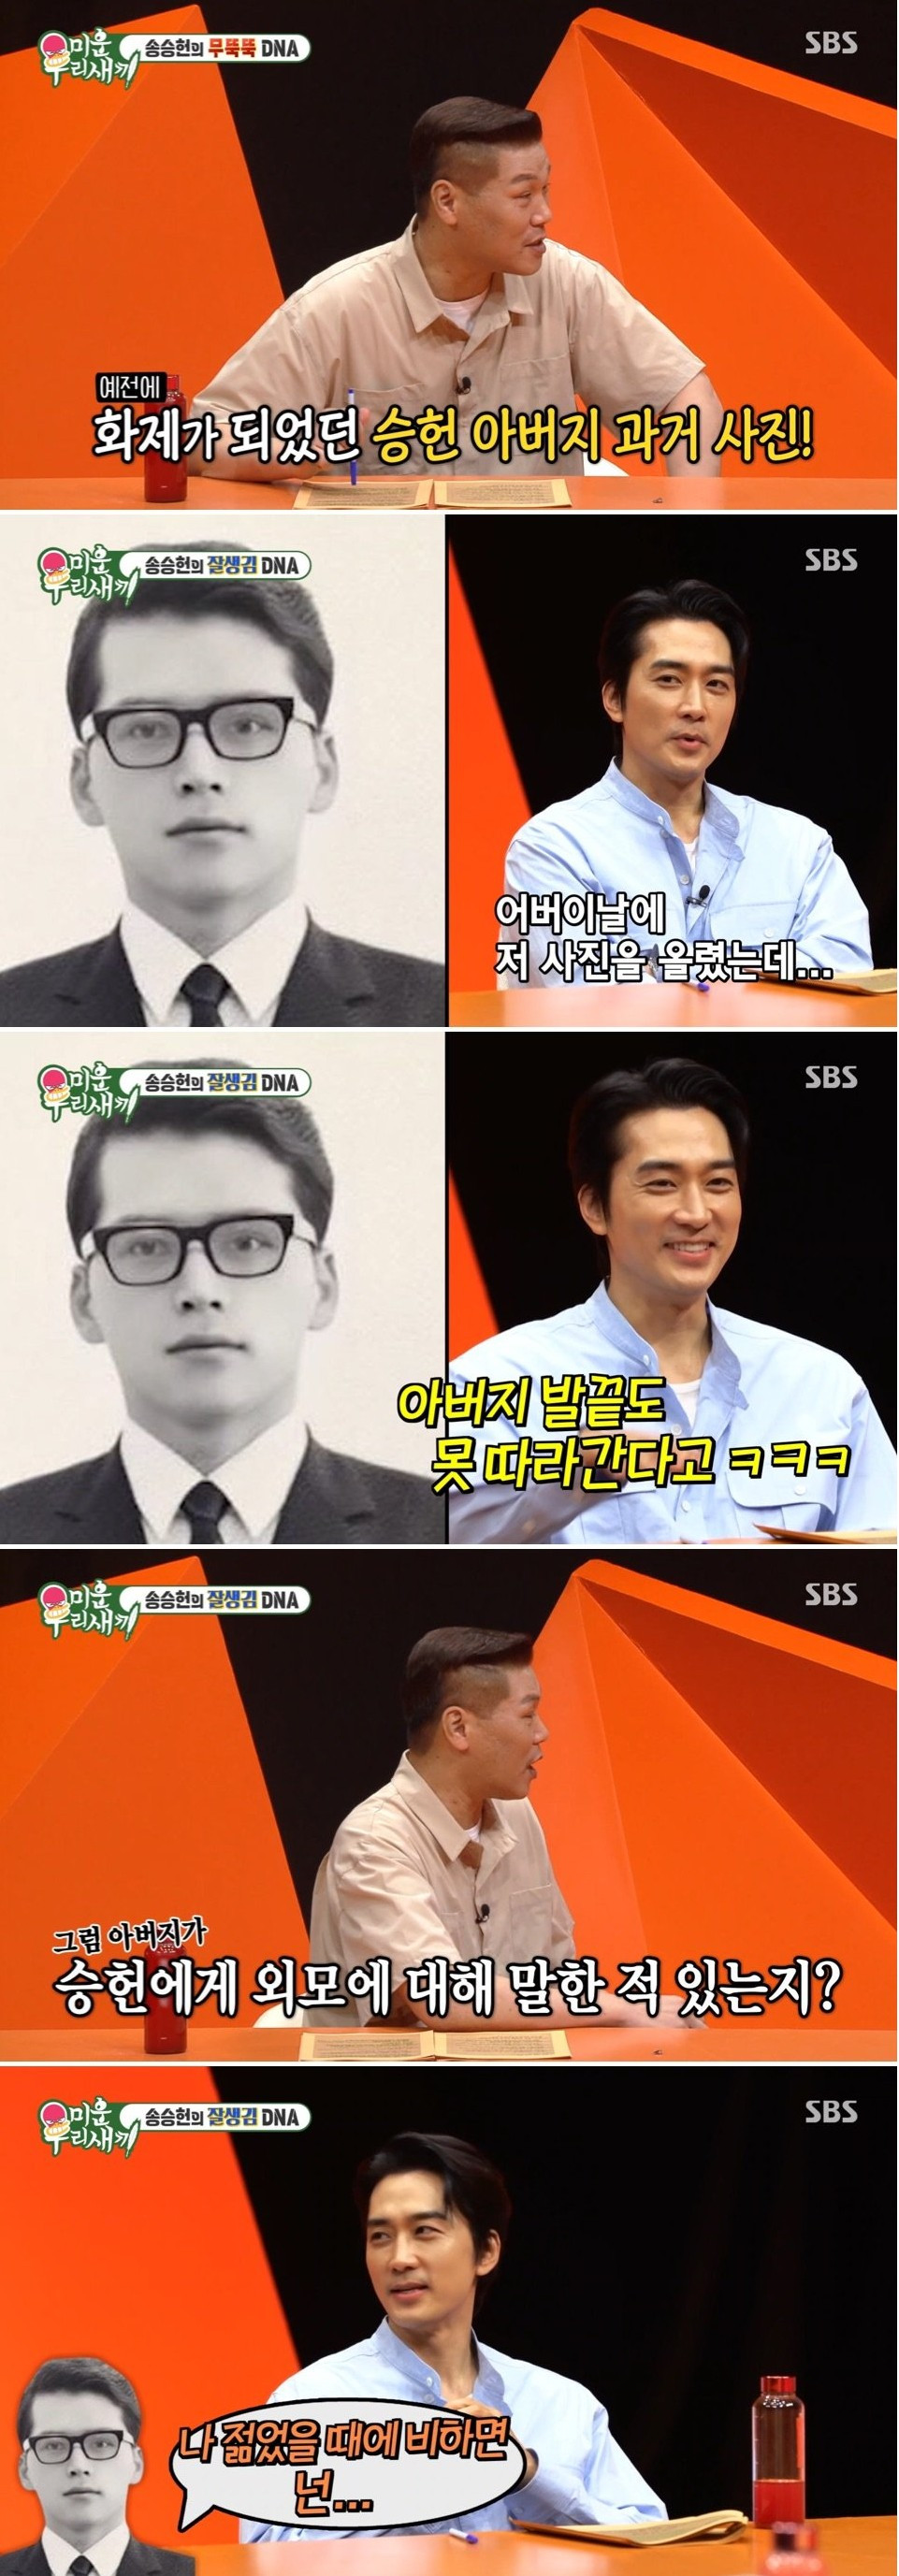 A celebrity who regrets revealing his father's ID photo